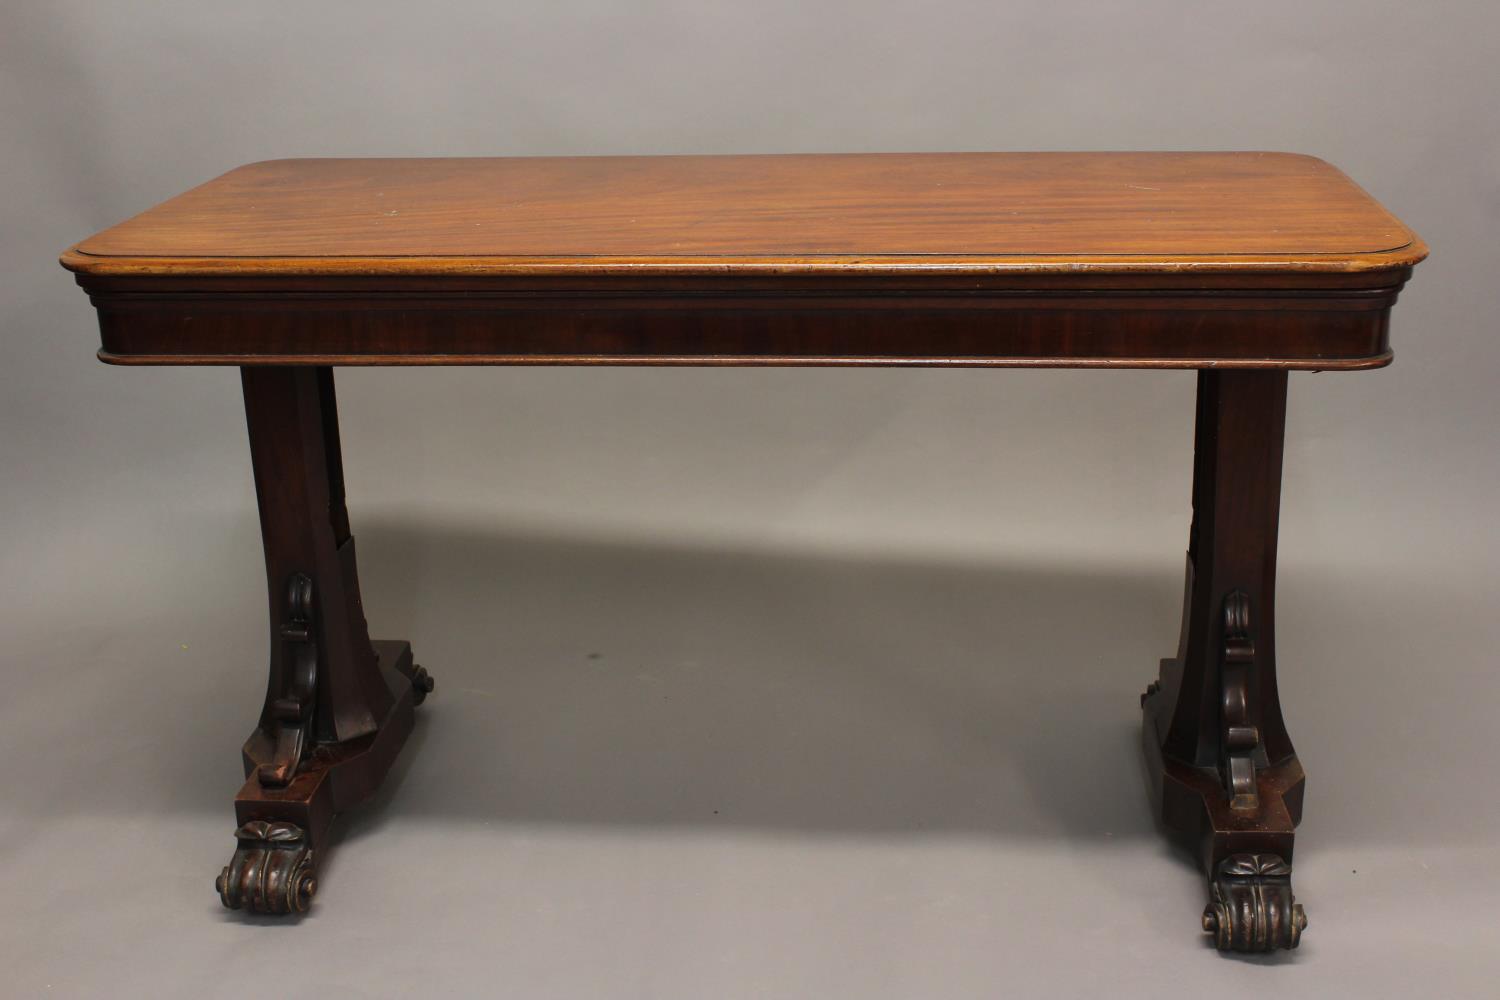 A VICTORIAN MAHOGANY METAMORPHIC DUMB WAITER. The rectangular top with moulded border rising to